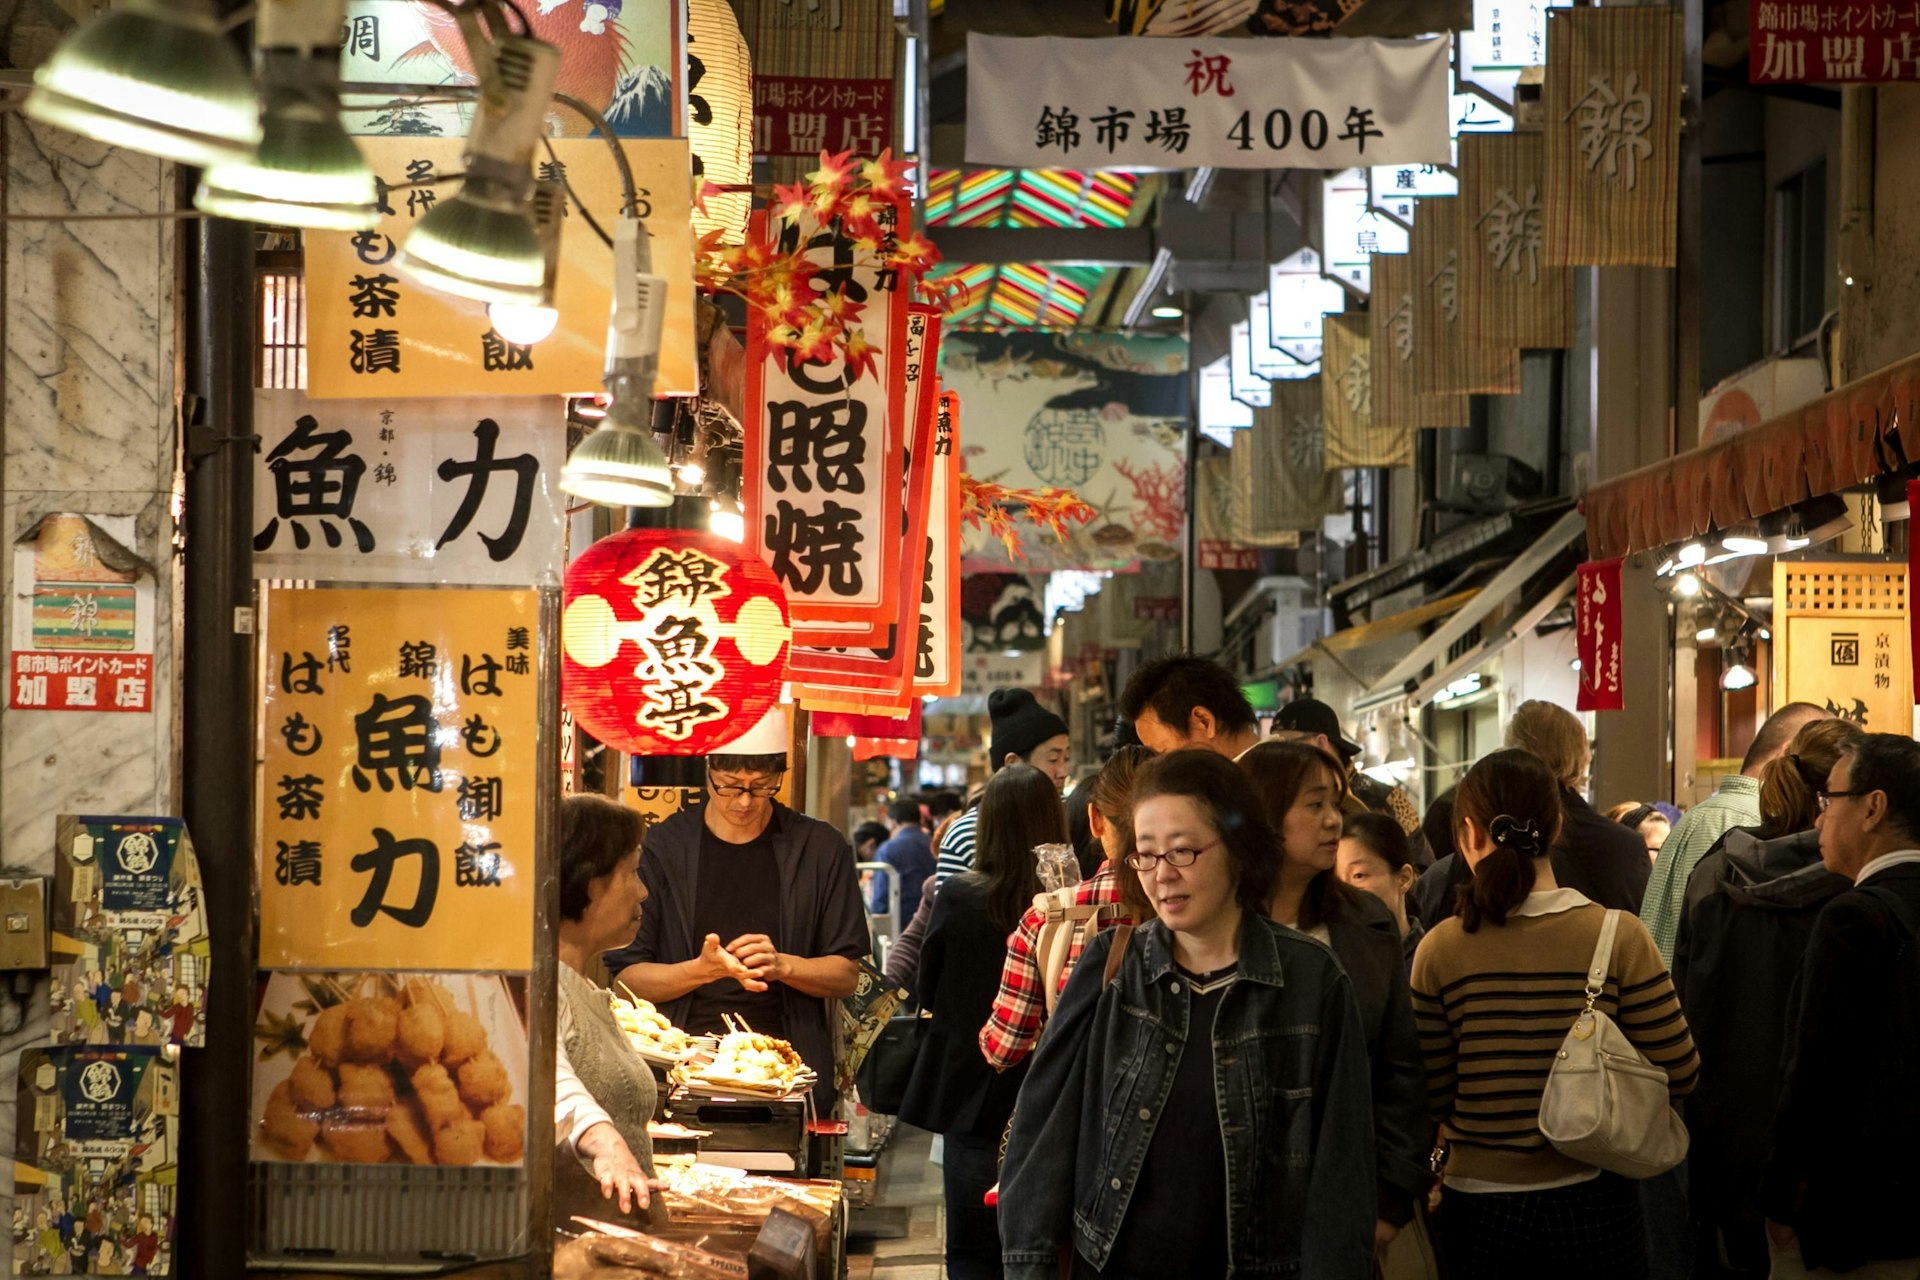 People in the famous Nishiki Market in Kyoto, Japan with Japanese signage